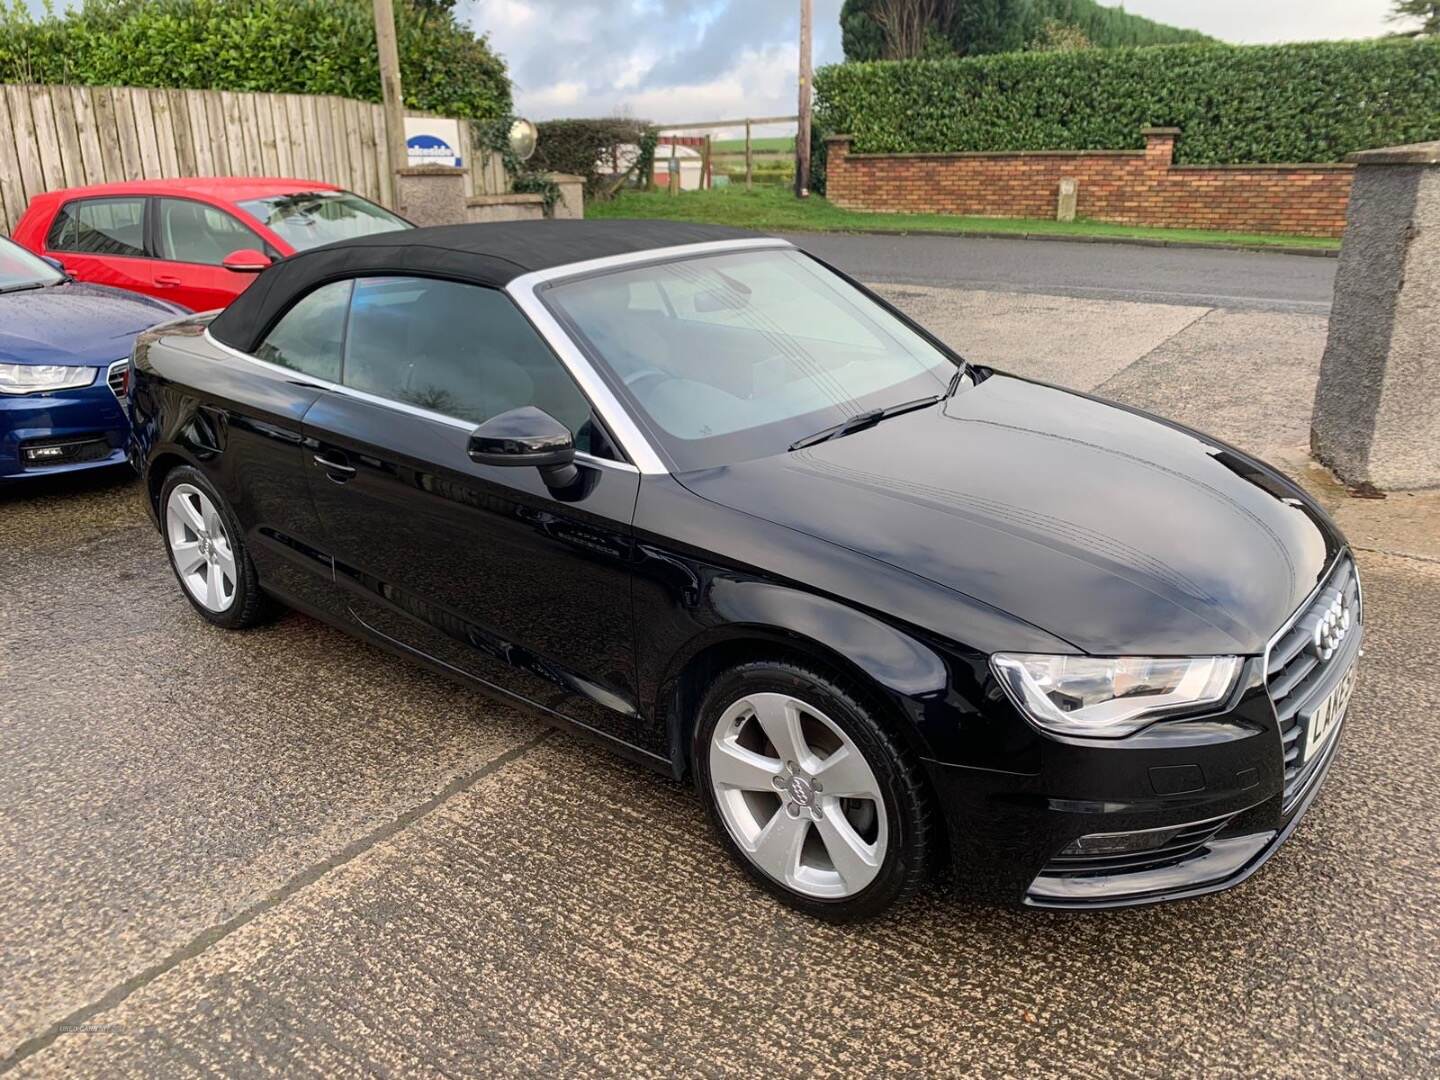 Audi A3 Cabriolet Head tuning Convertible with great economy in Down